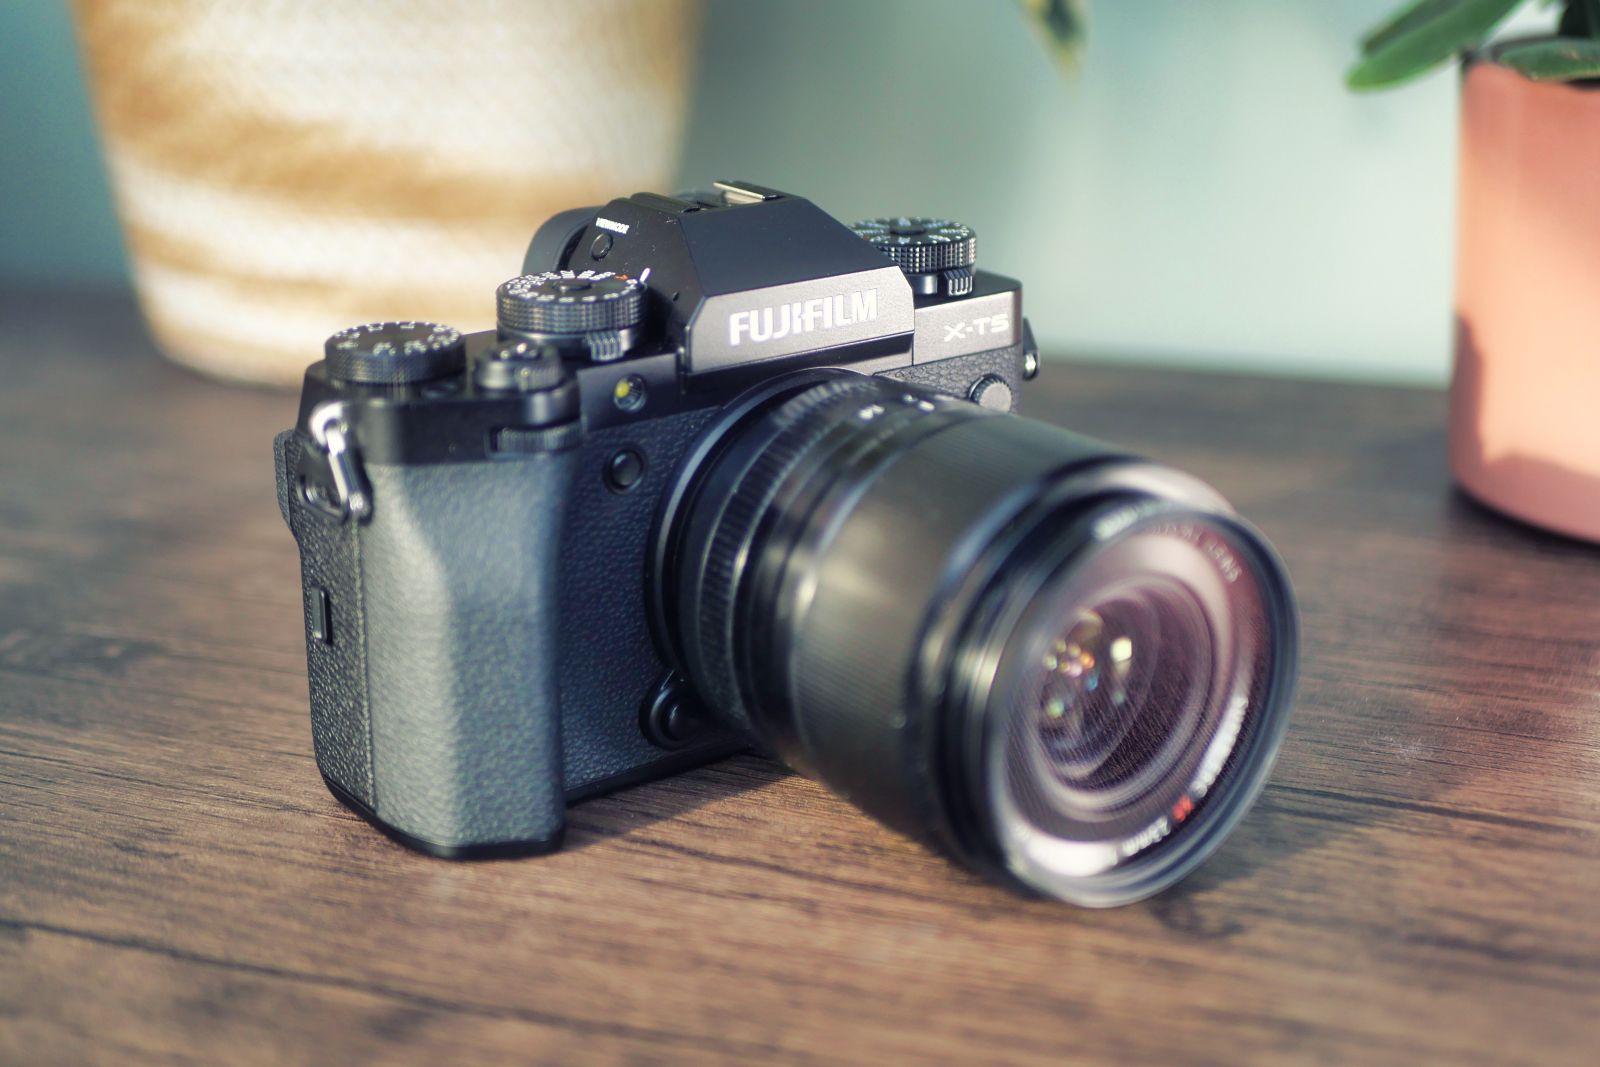 Fujifilm X-T5 review: The photographer's choice